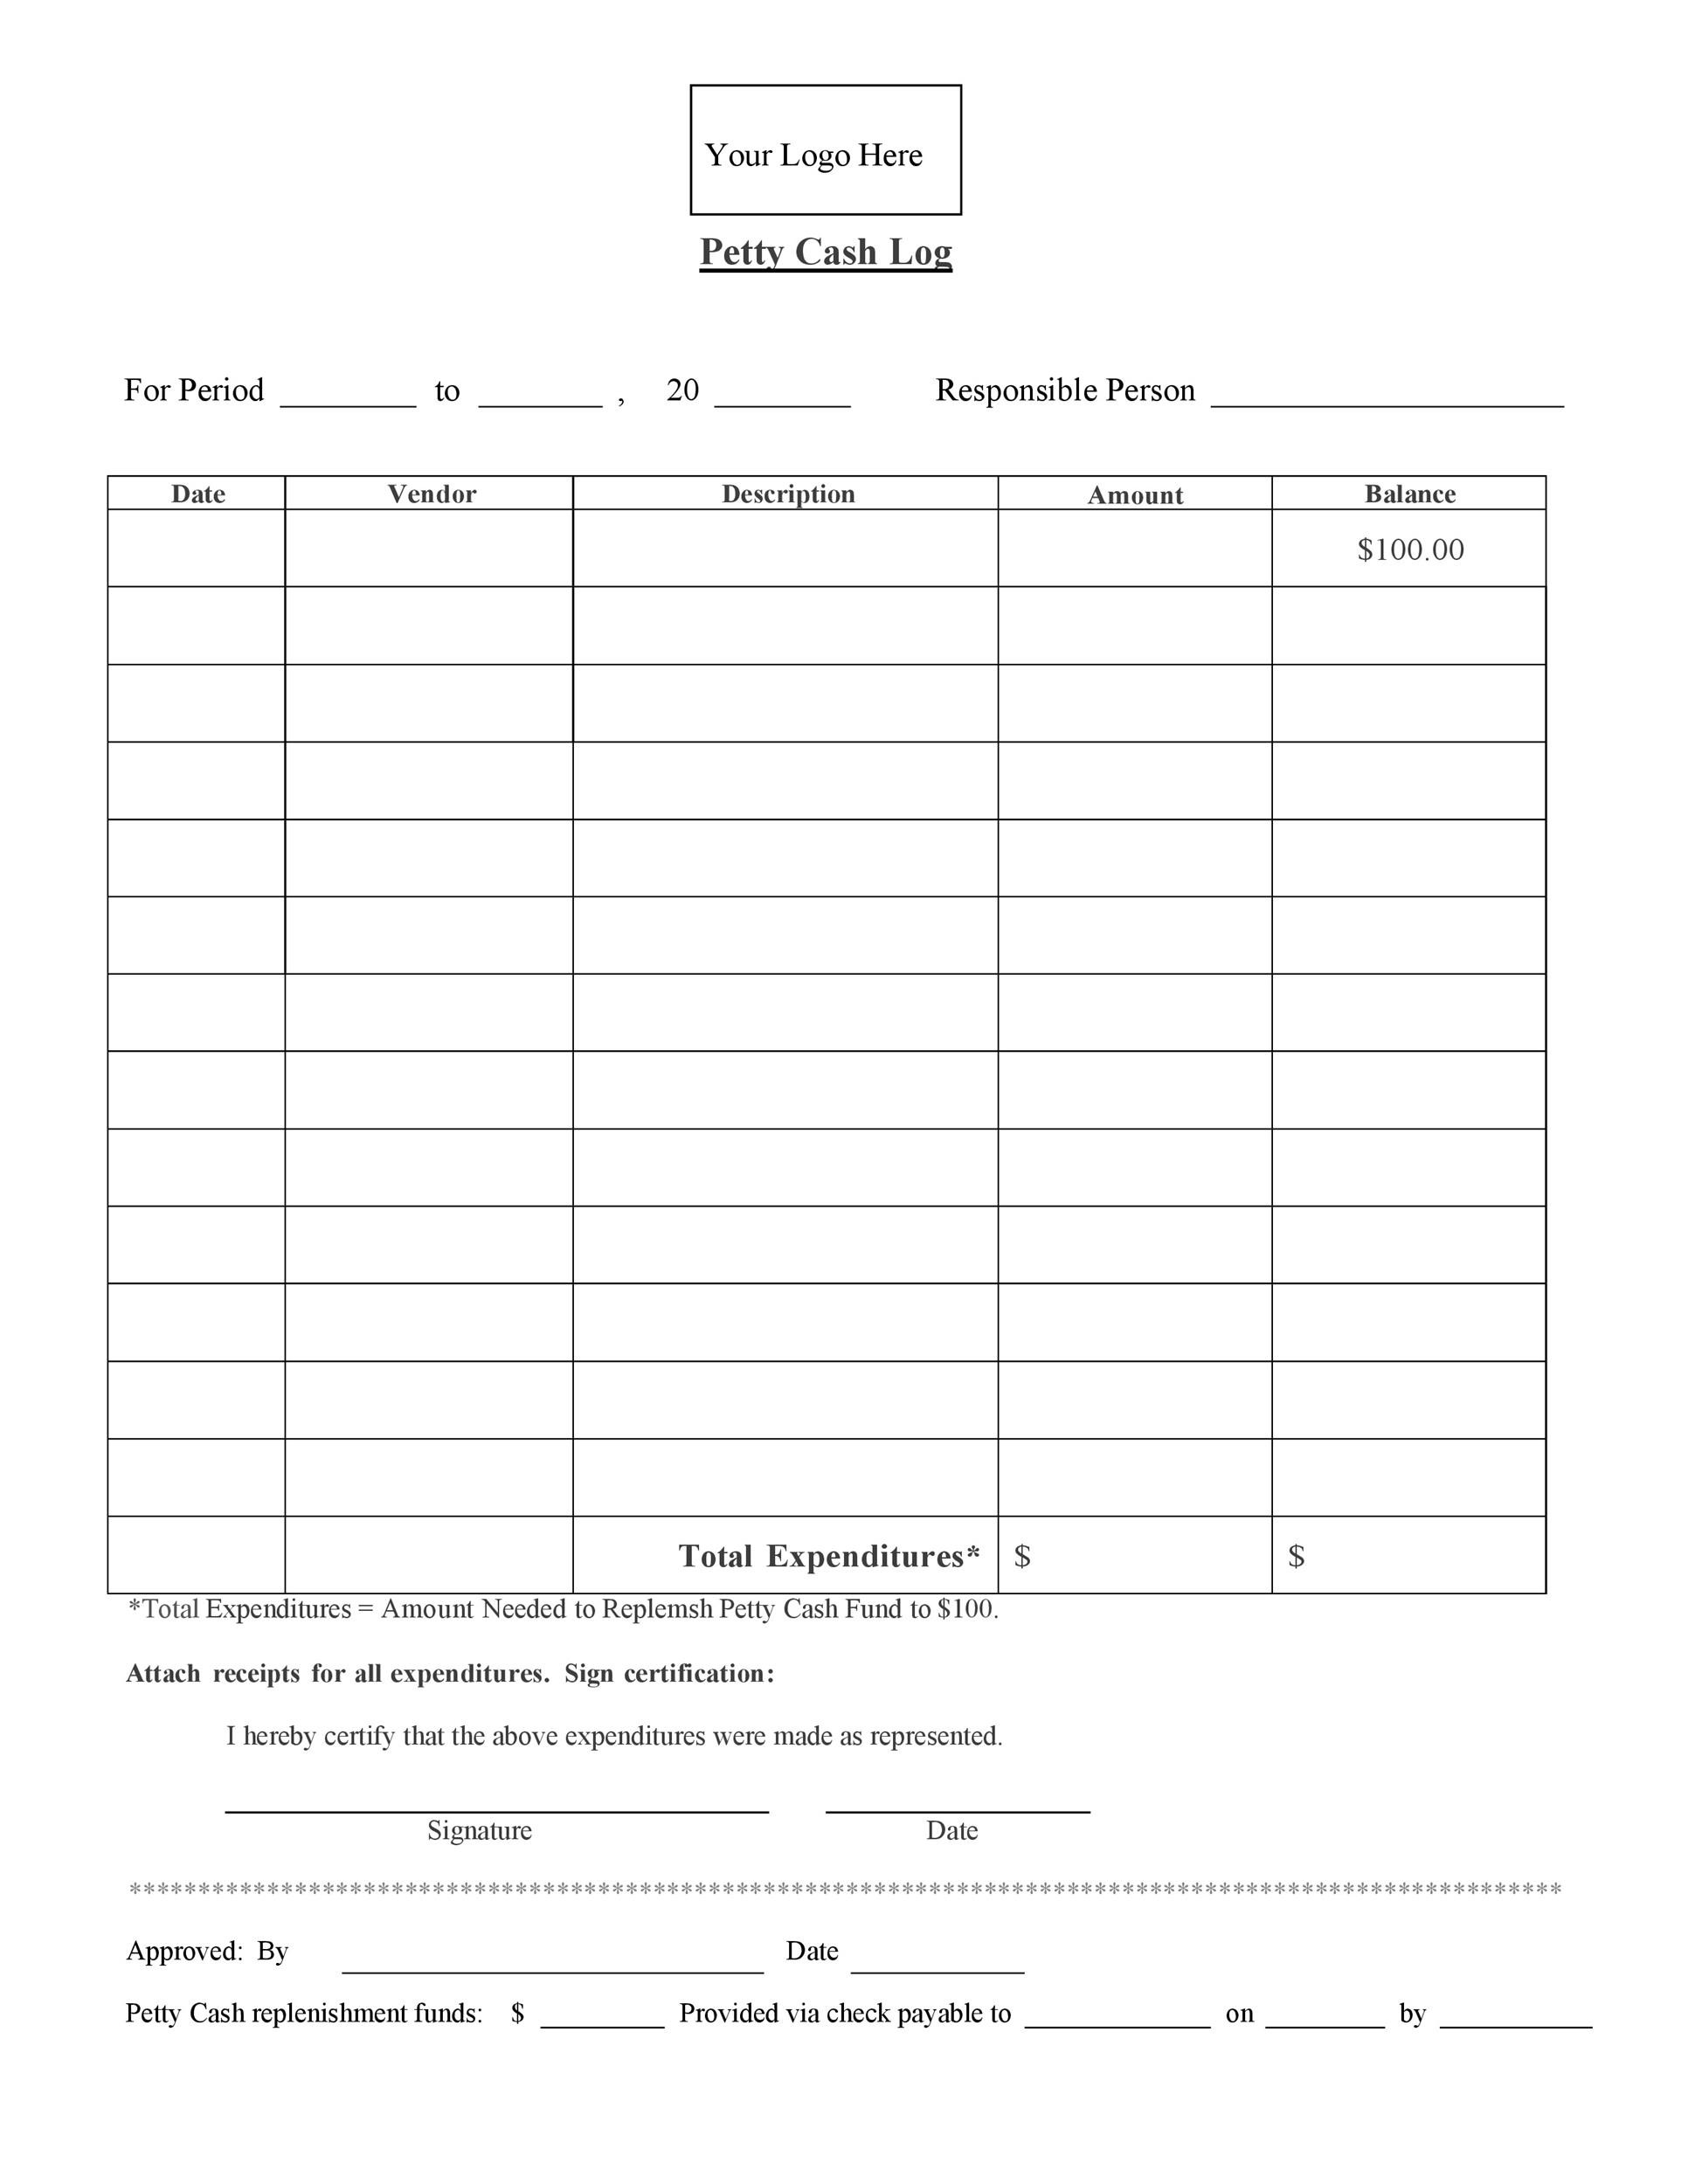 free-printable-petty-cash-forms-printable-forms-free-online